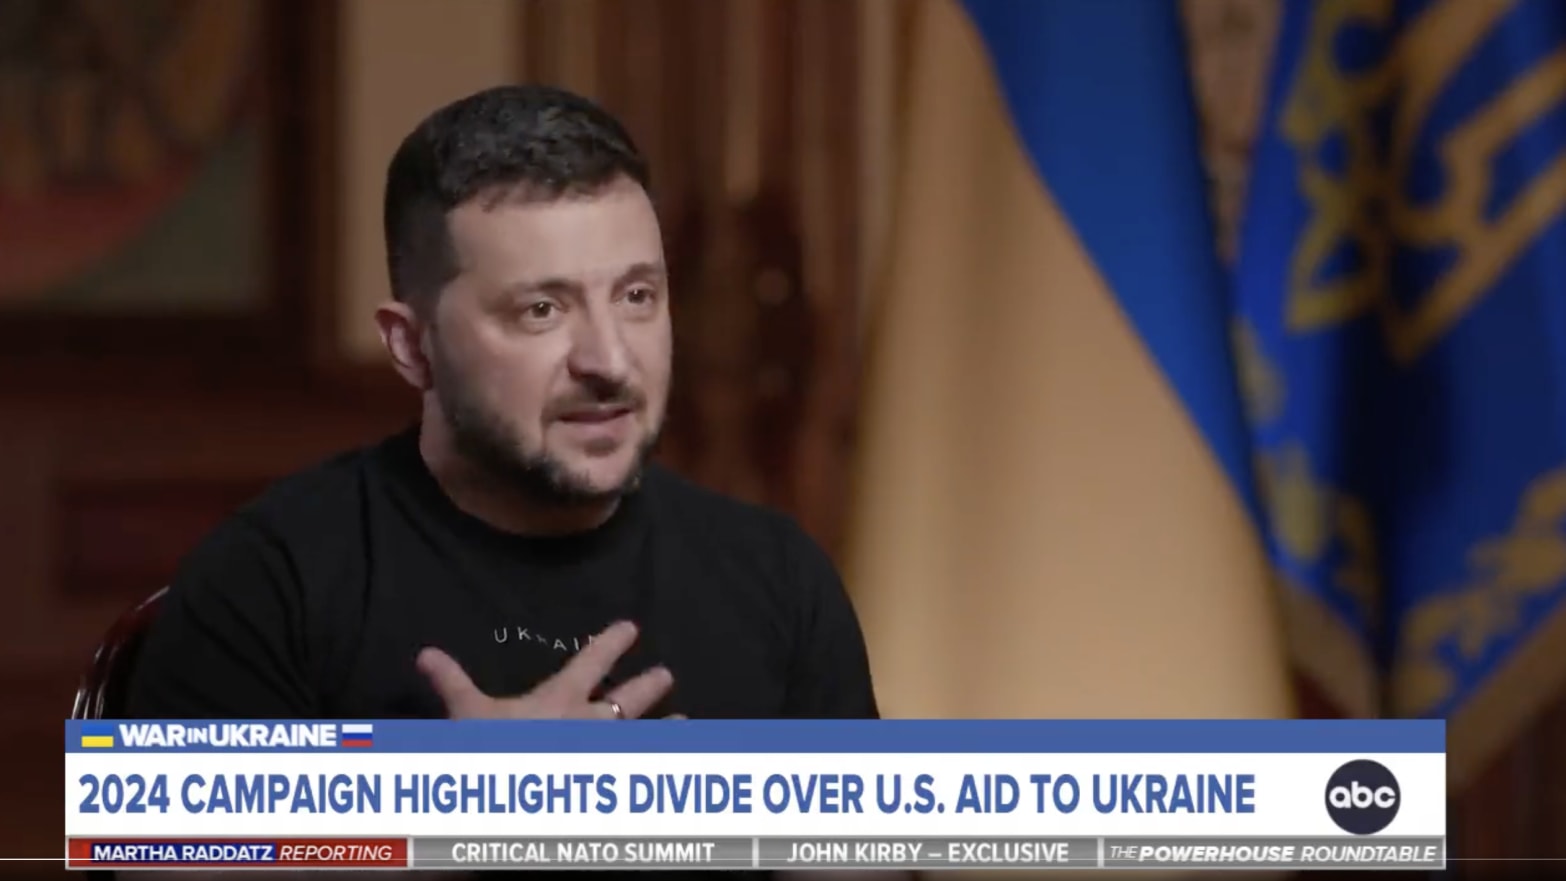 Ukrainian President Volodymyr Zelensky called out Donald Trump on Sunday for his outlandish and repeated claims that he could end the country’s drawn-out conflict with Russia in just a day if reelected.